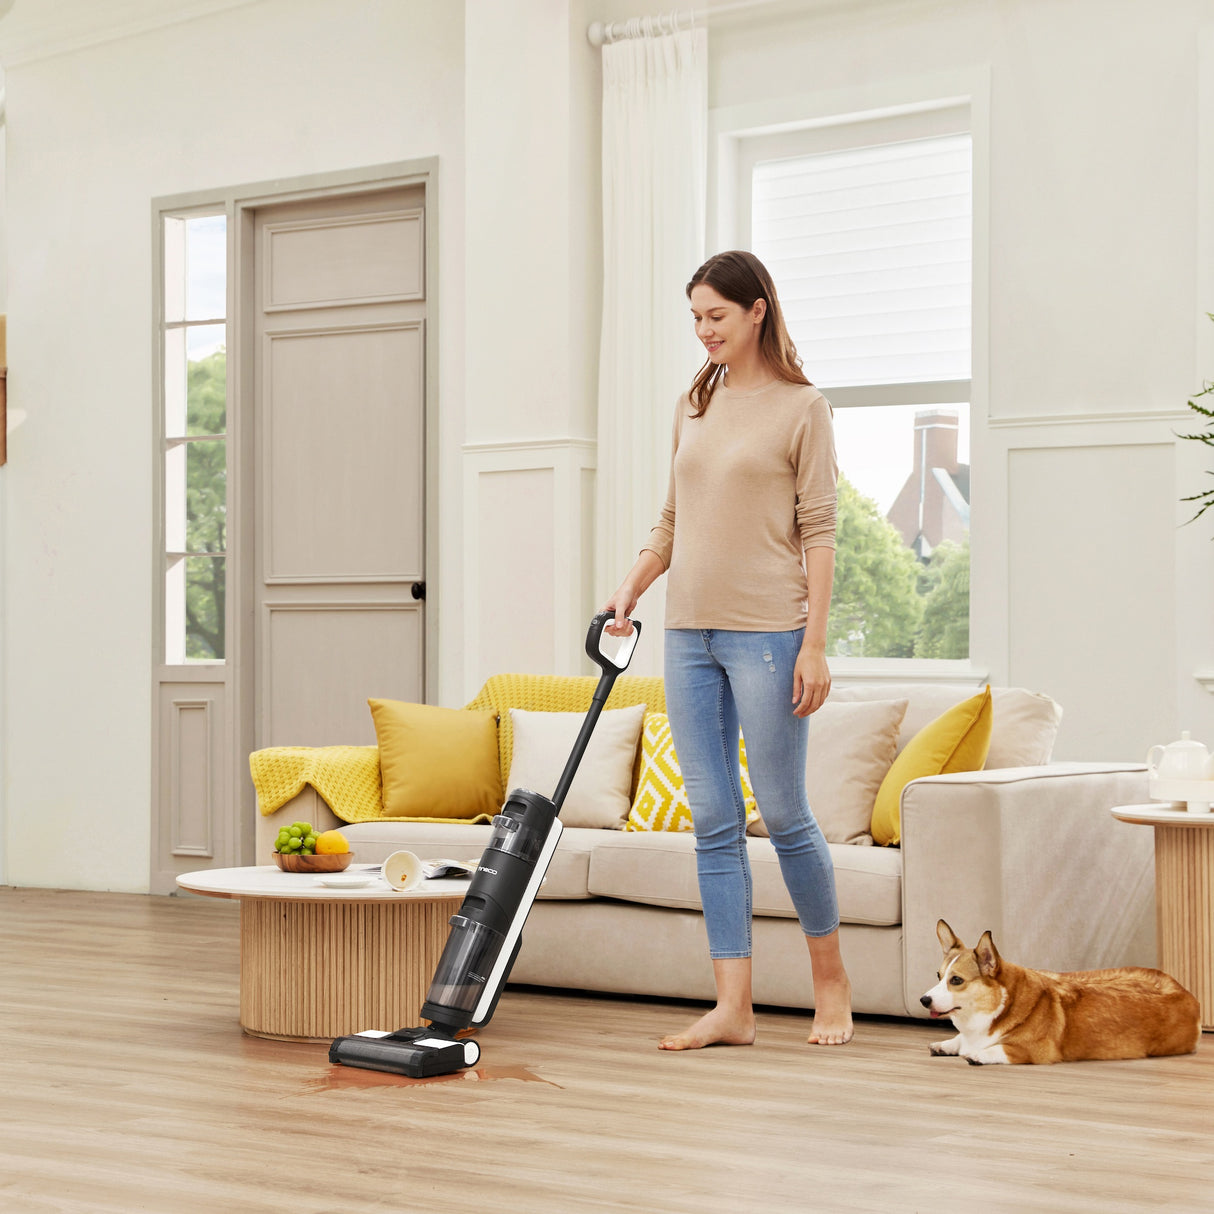 Tineco Floor ONE S3 Breeze Cordless Hardwood Floors Cleaner with Smart  Control System